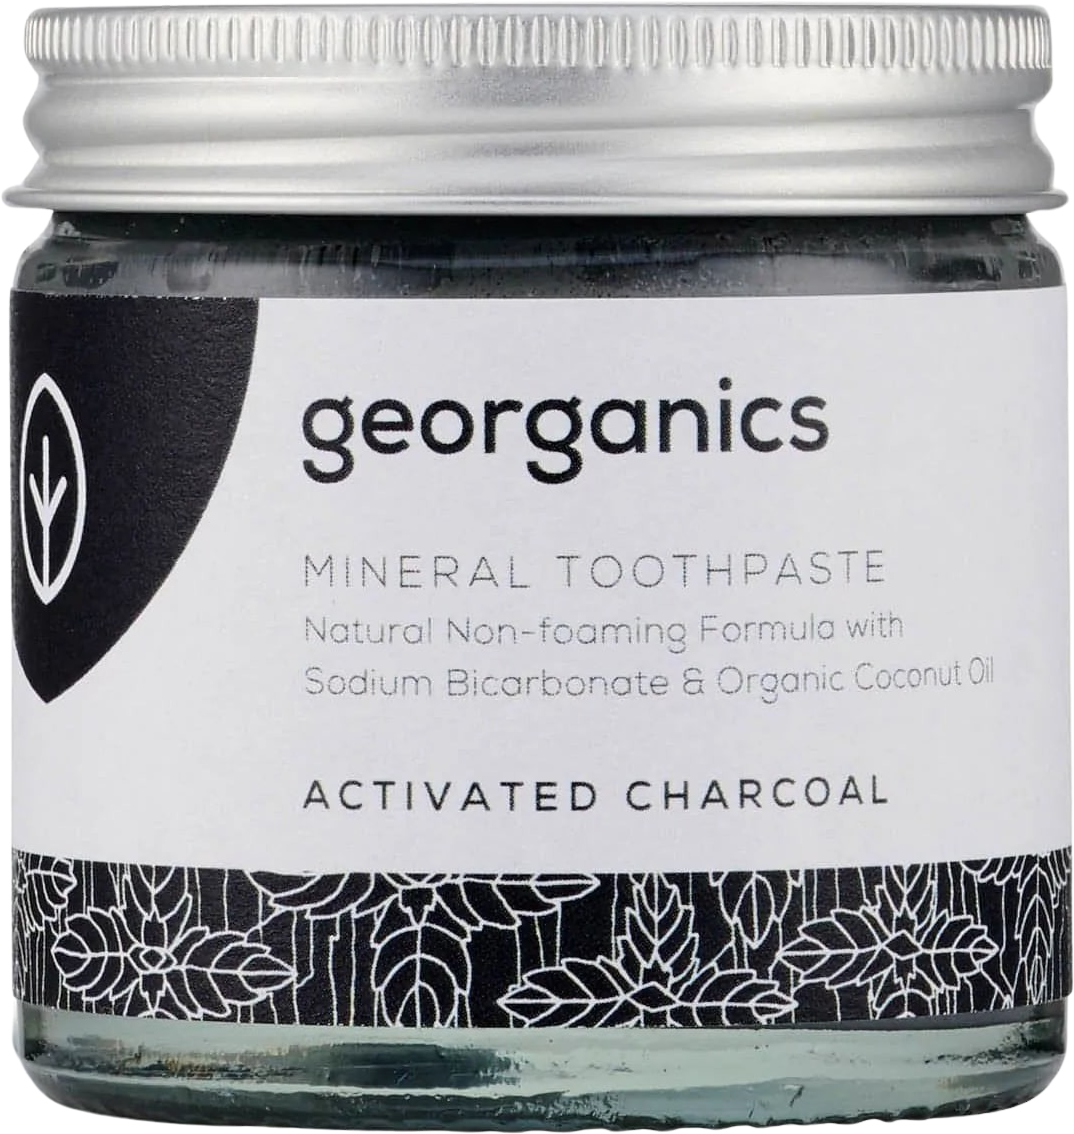 Georganics Natural Toothpaste Activated Charcoal - 60 ml